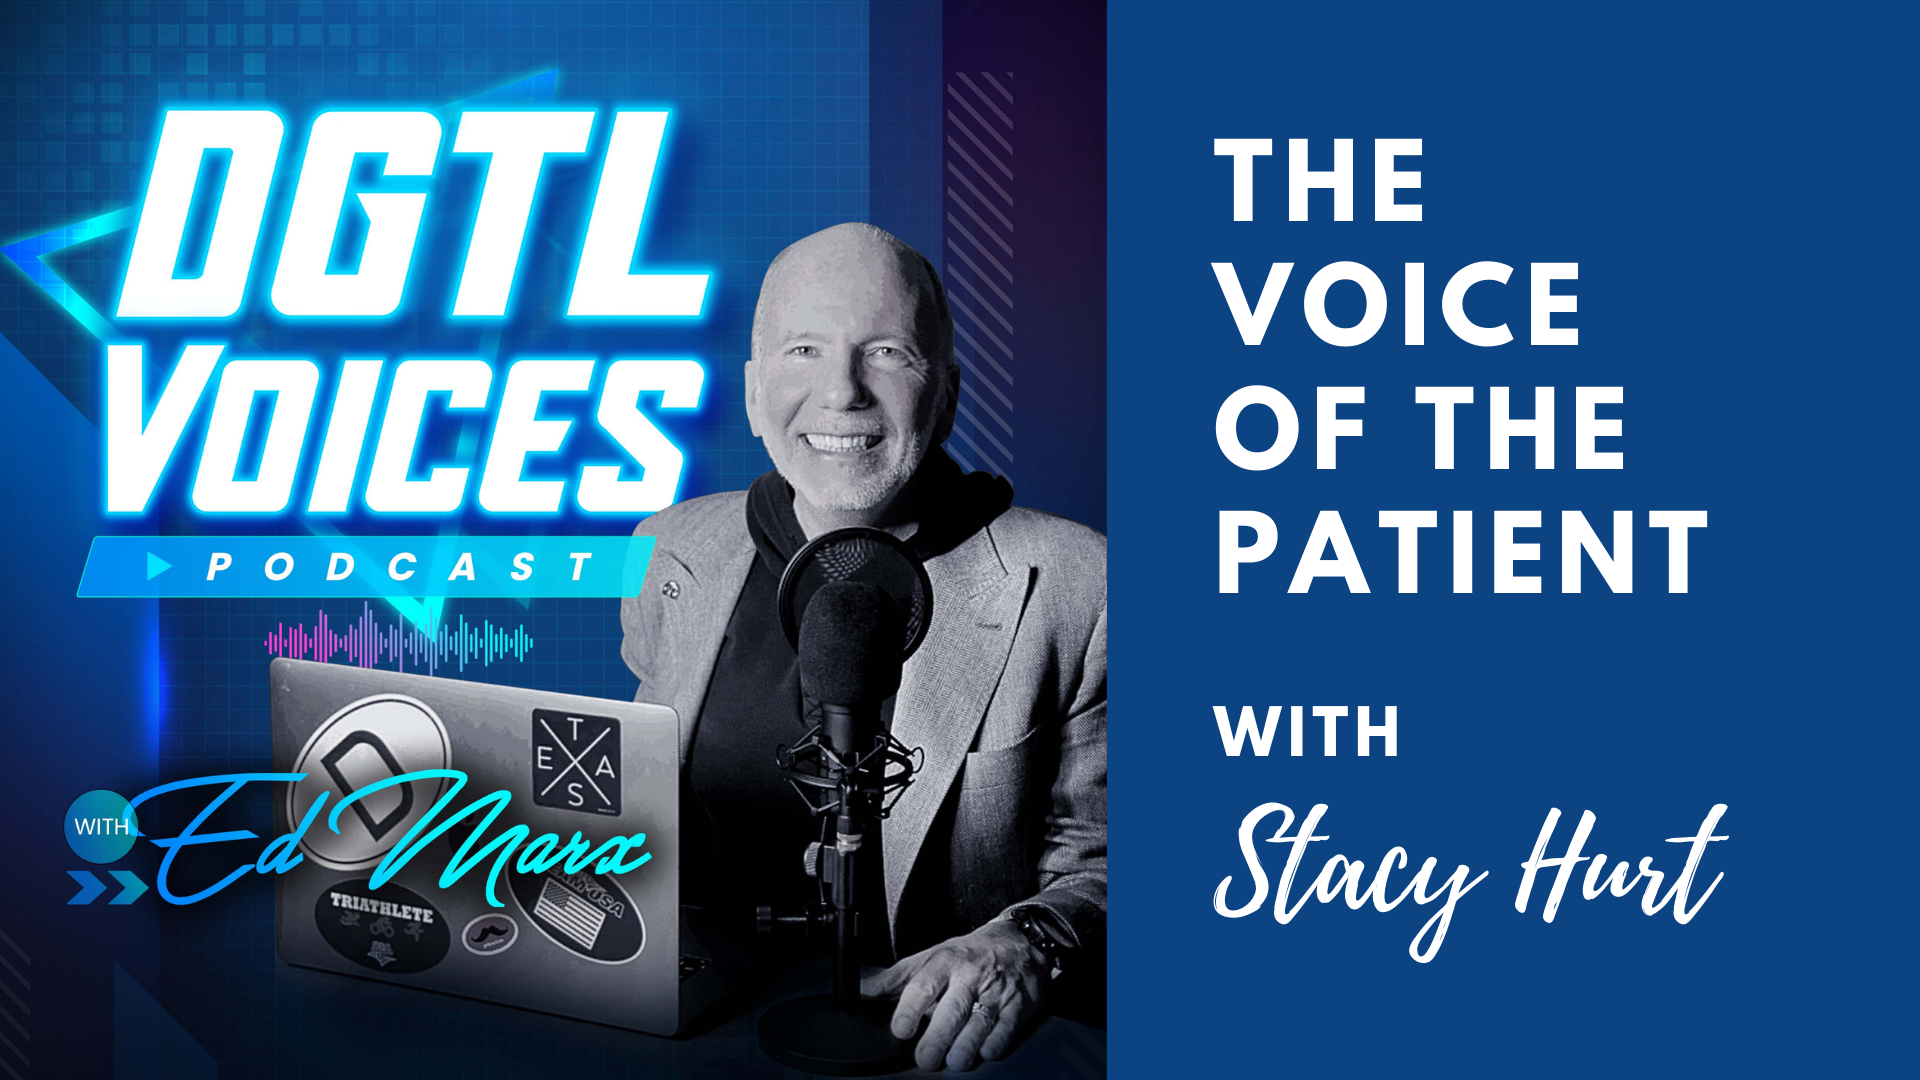 The Voice of the Patient